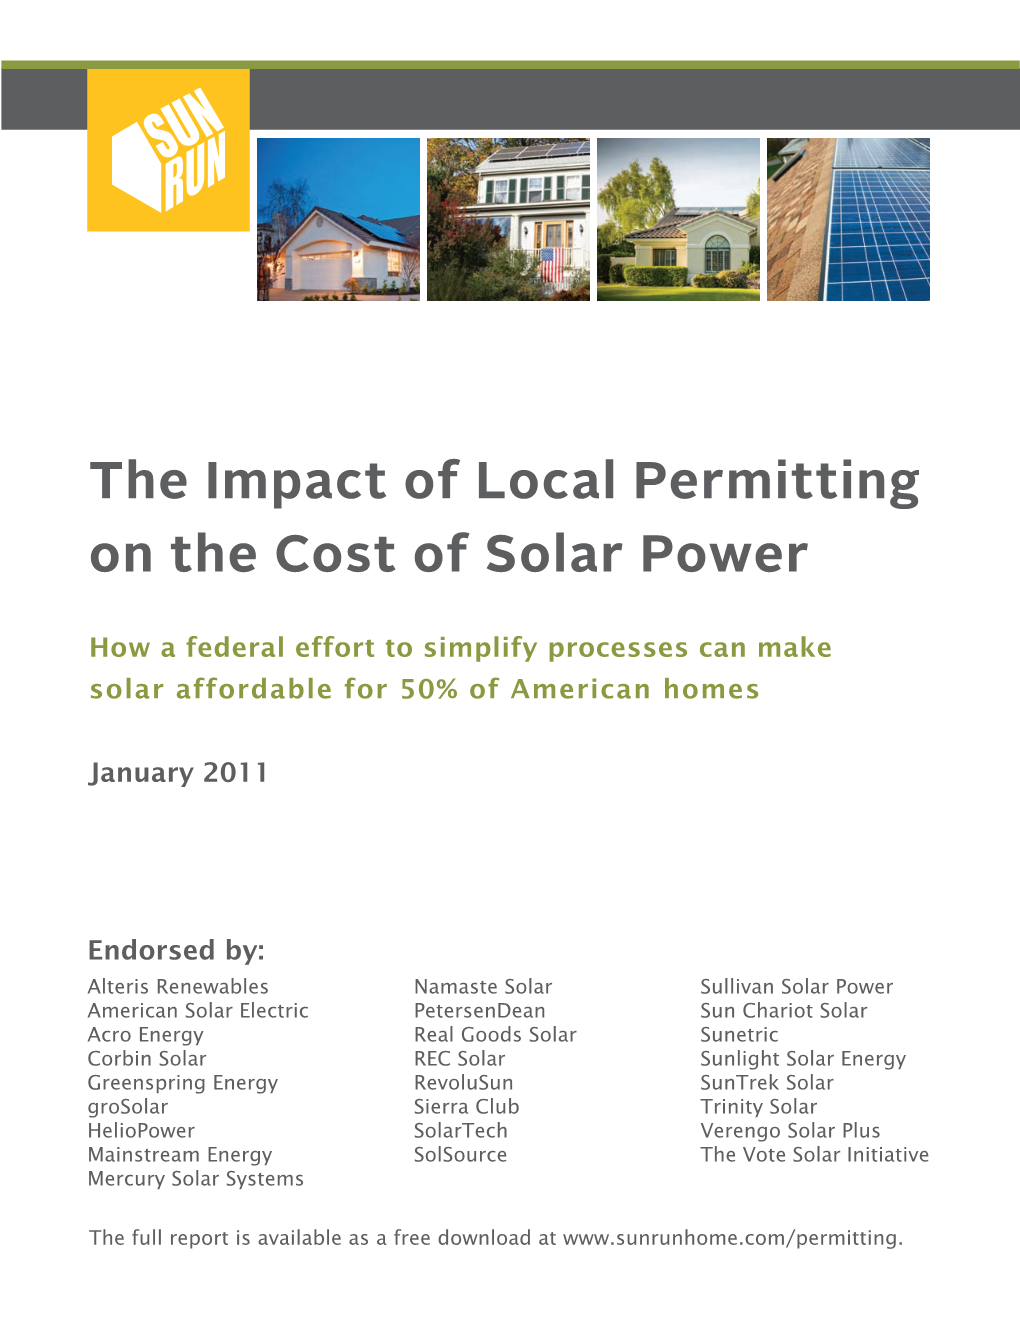 The Impact of Local Permitting on the Cost of Solar Power